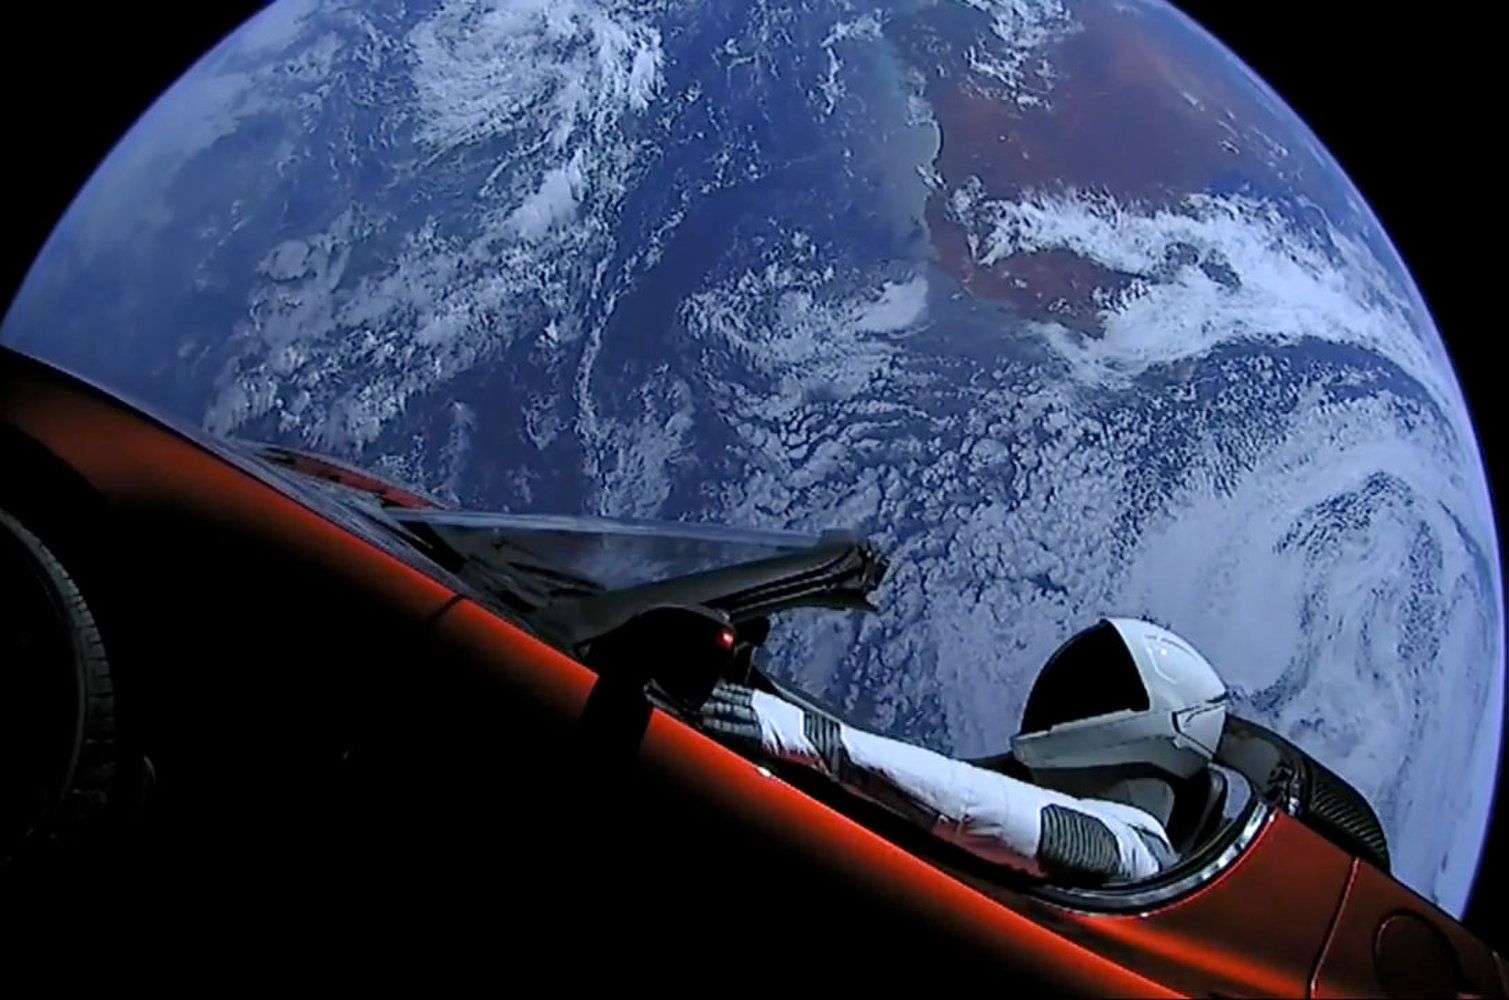 SpaceX’s ‘Starman’ and Its Tesla Roadster Are Now Beyond Mars1509 x 1000